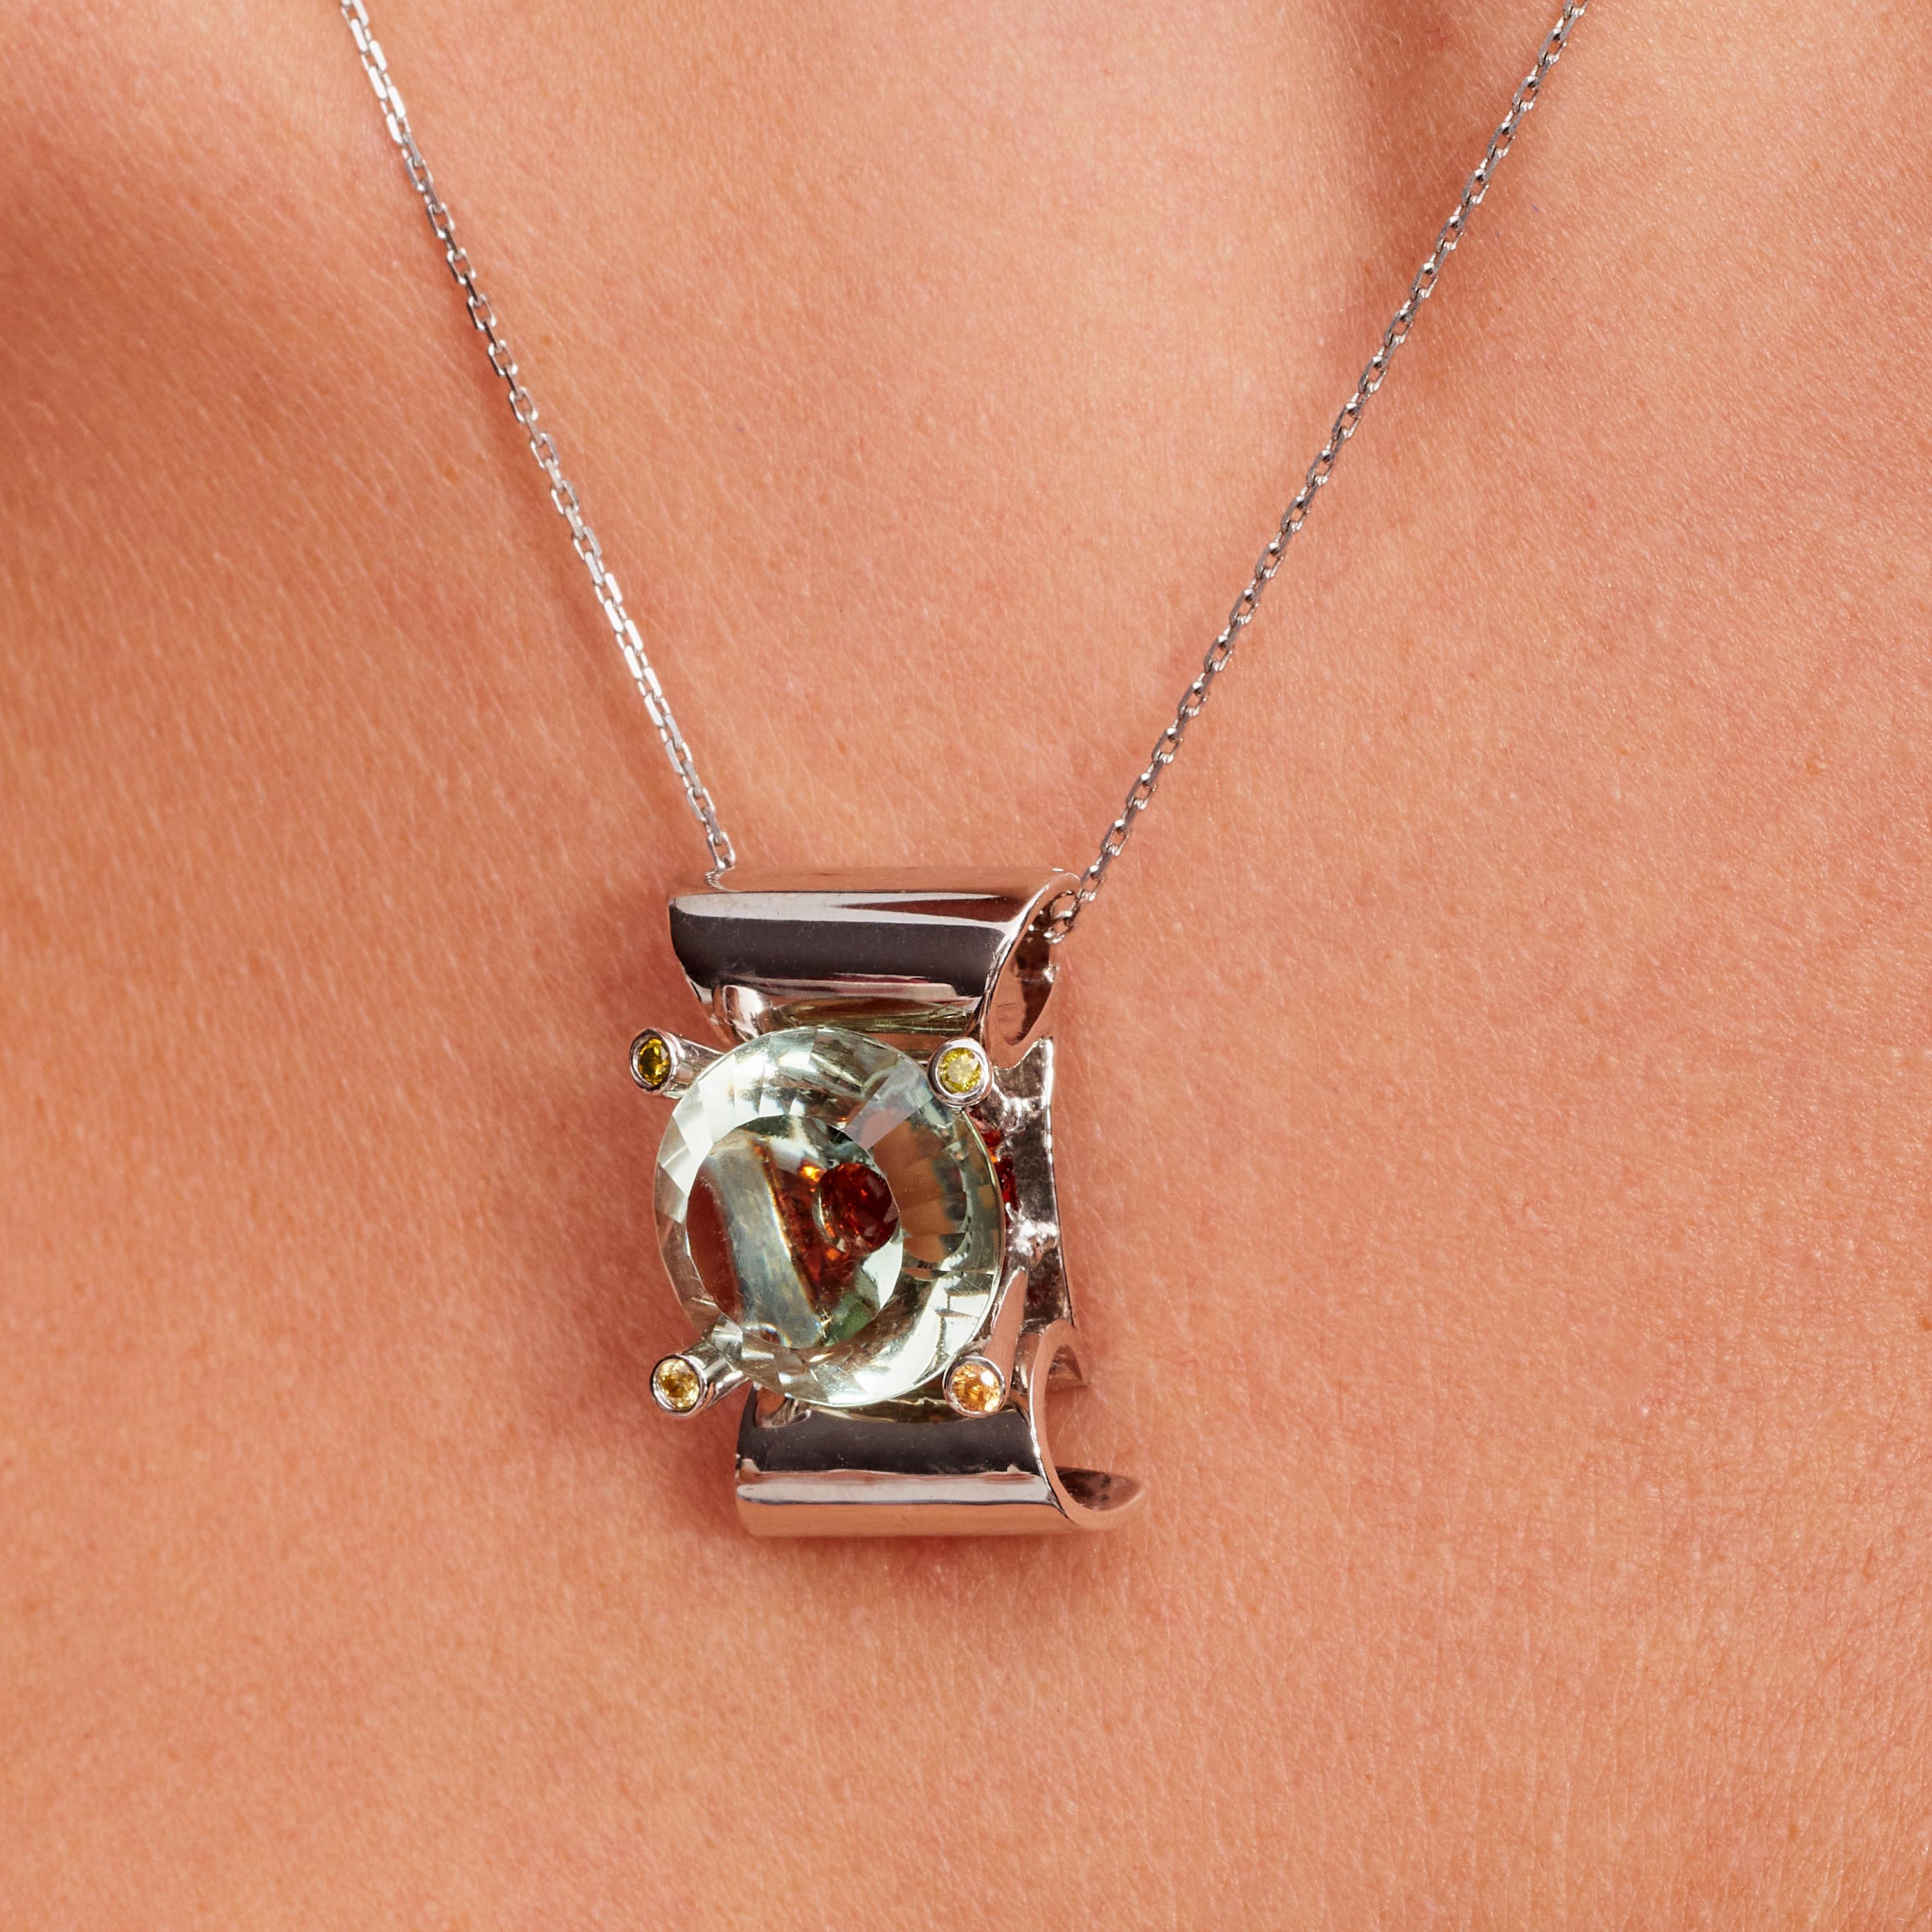 9 Carat Prasiolite, Spessartite, Diamond, White Gold Pendant Necklace, In Stock. This pendant necklace is made out of 18-karat white gold and comes with the 18-karat white gold chain it’s shown on. The center stone in the necklace is a nine carat